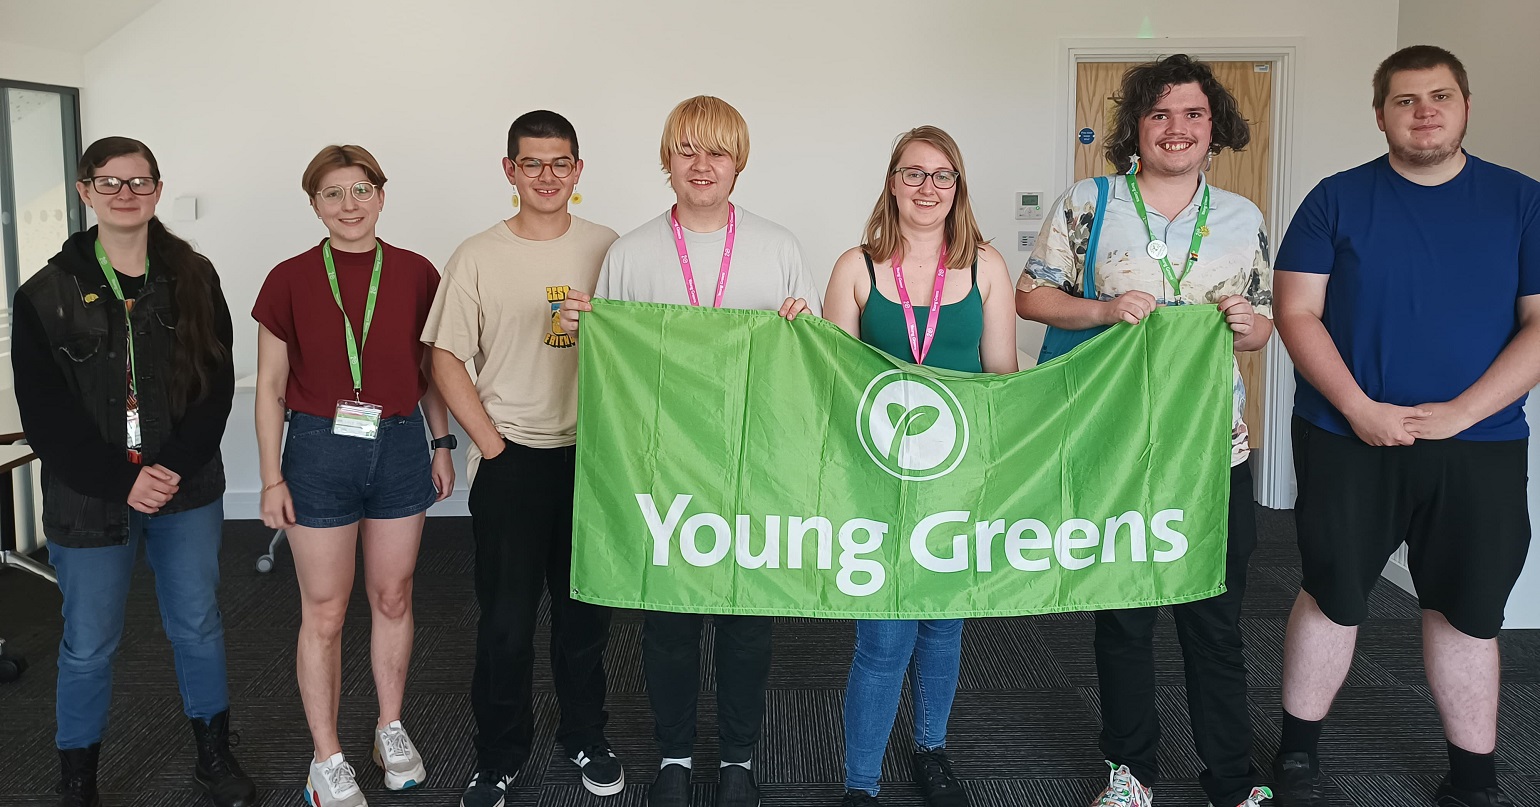 A photo of members the newly elected Young Greens Executive